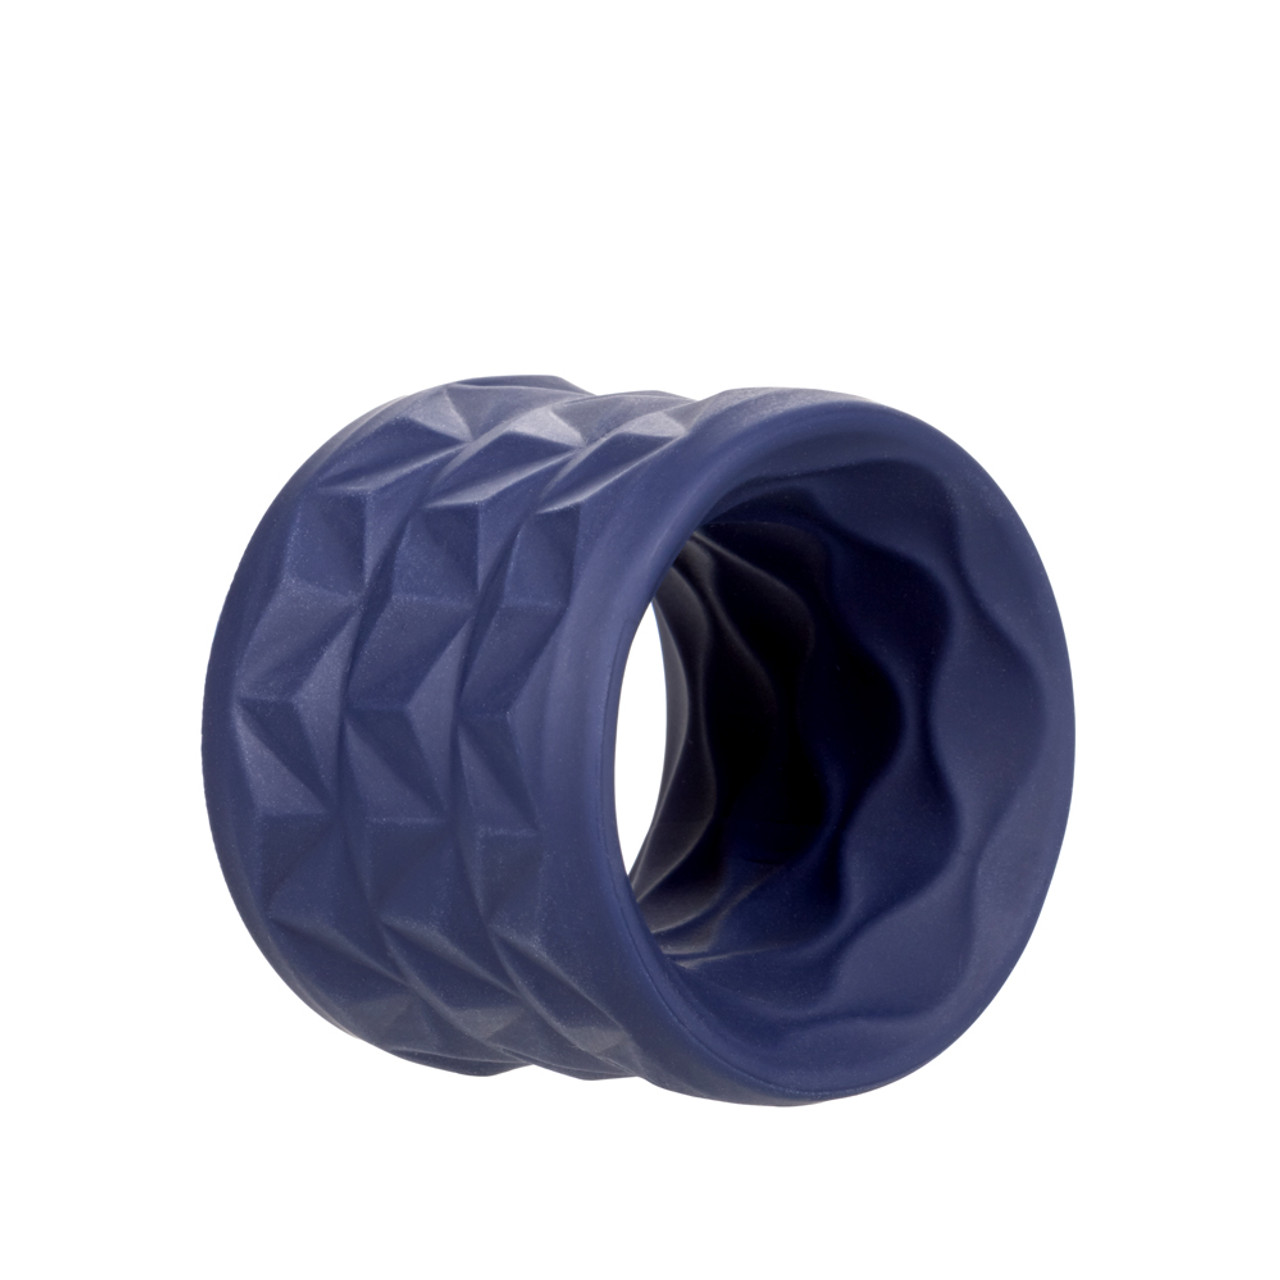 Rubber Cock Ring